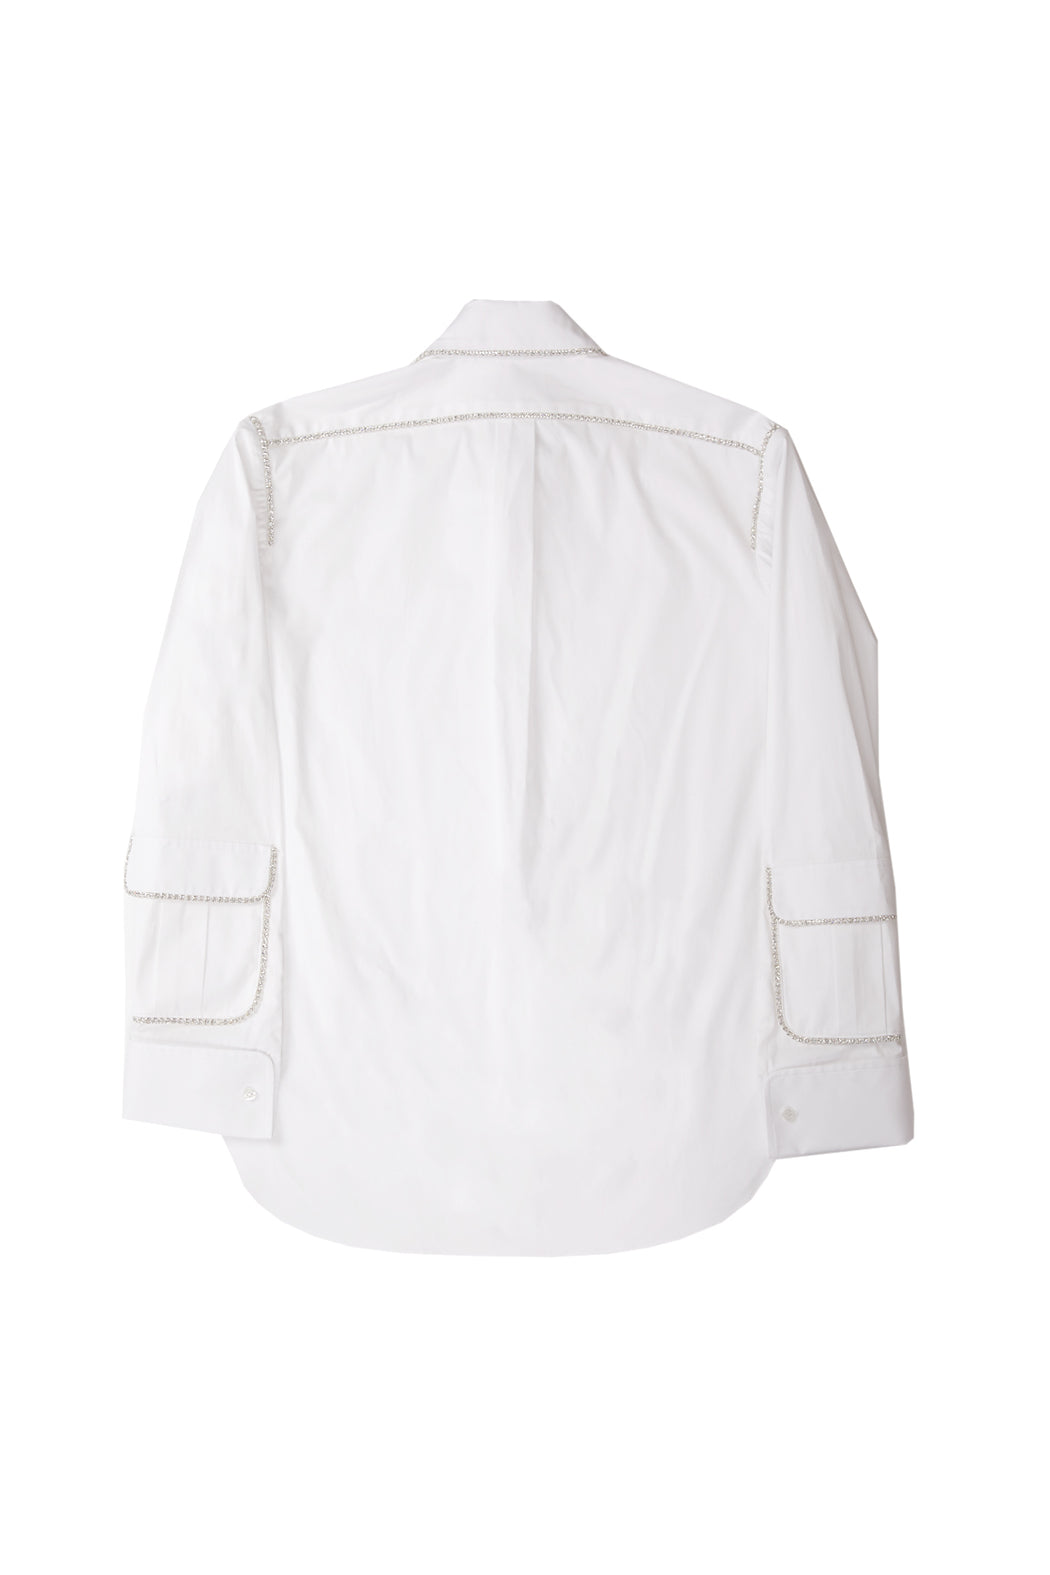 Button Down with Cargo Pocket Sleeve - White